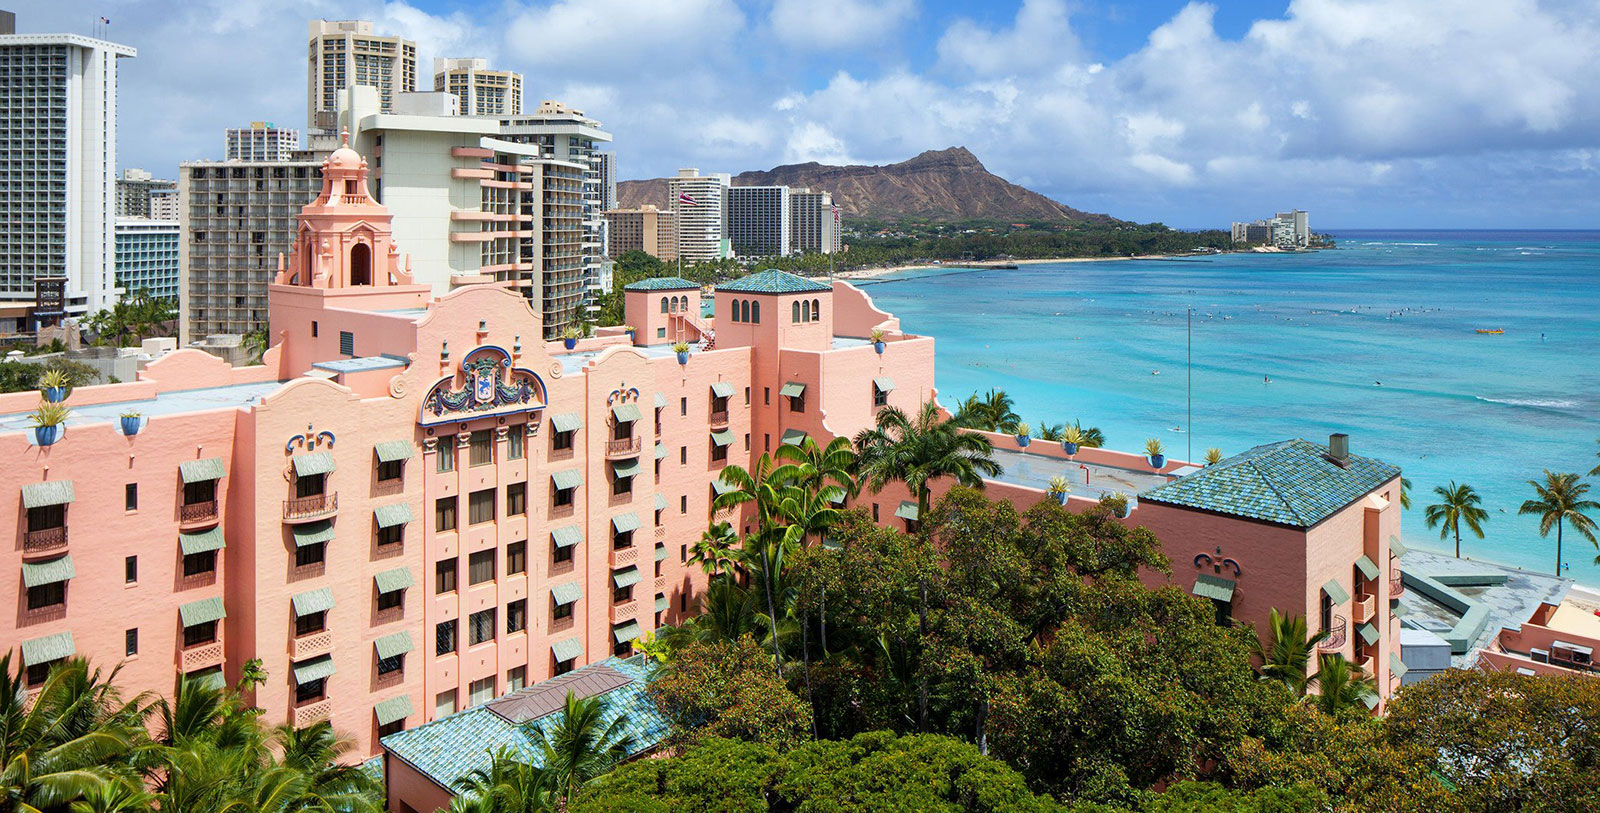 Discover the International Market Place, the Waikiki Beach Walk, and the Fort Derussy Beach Park from “The Pink Palace of the Pacific.”